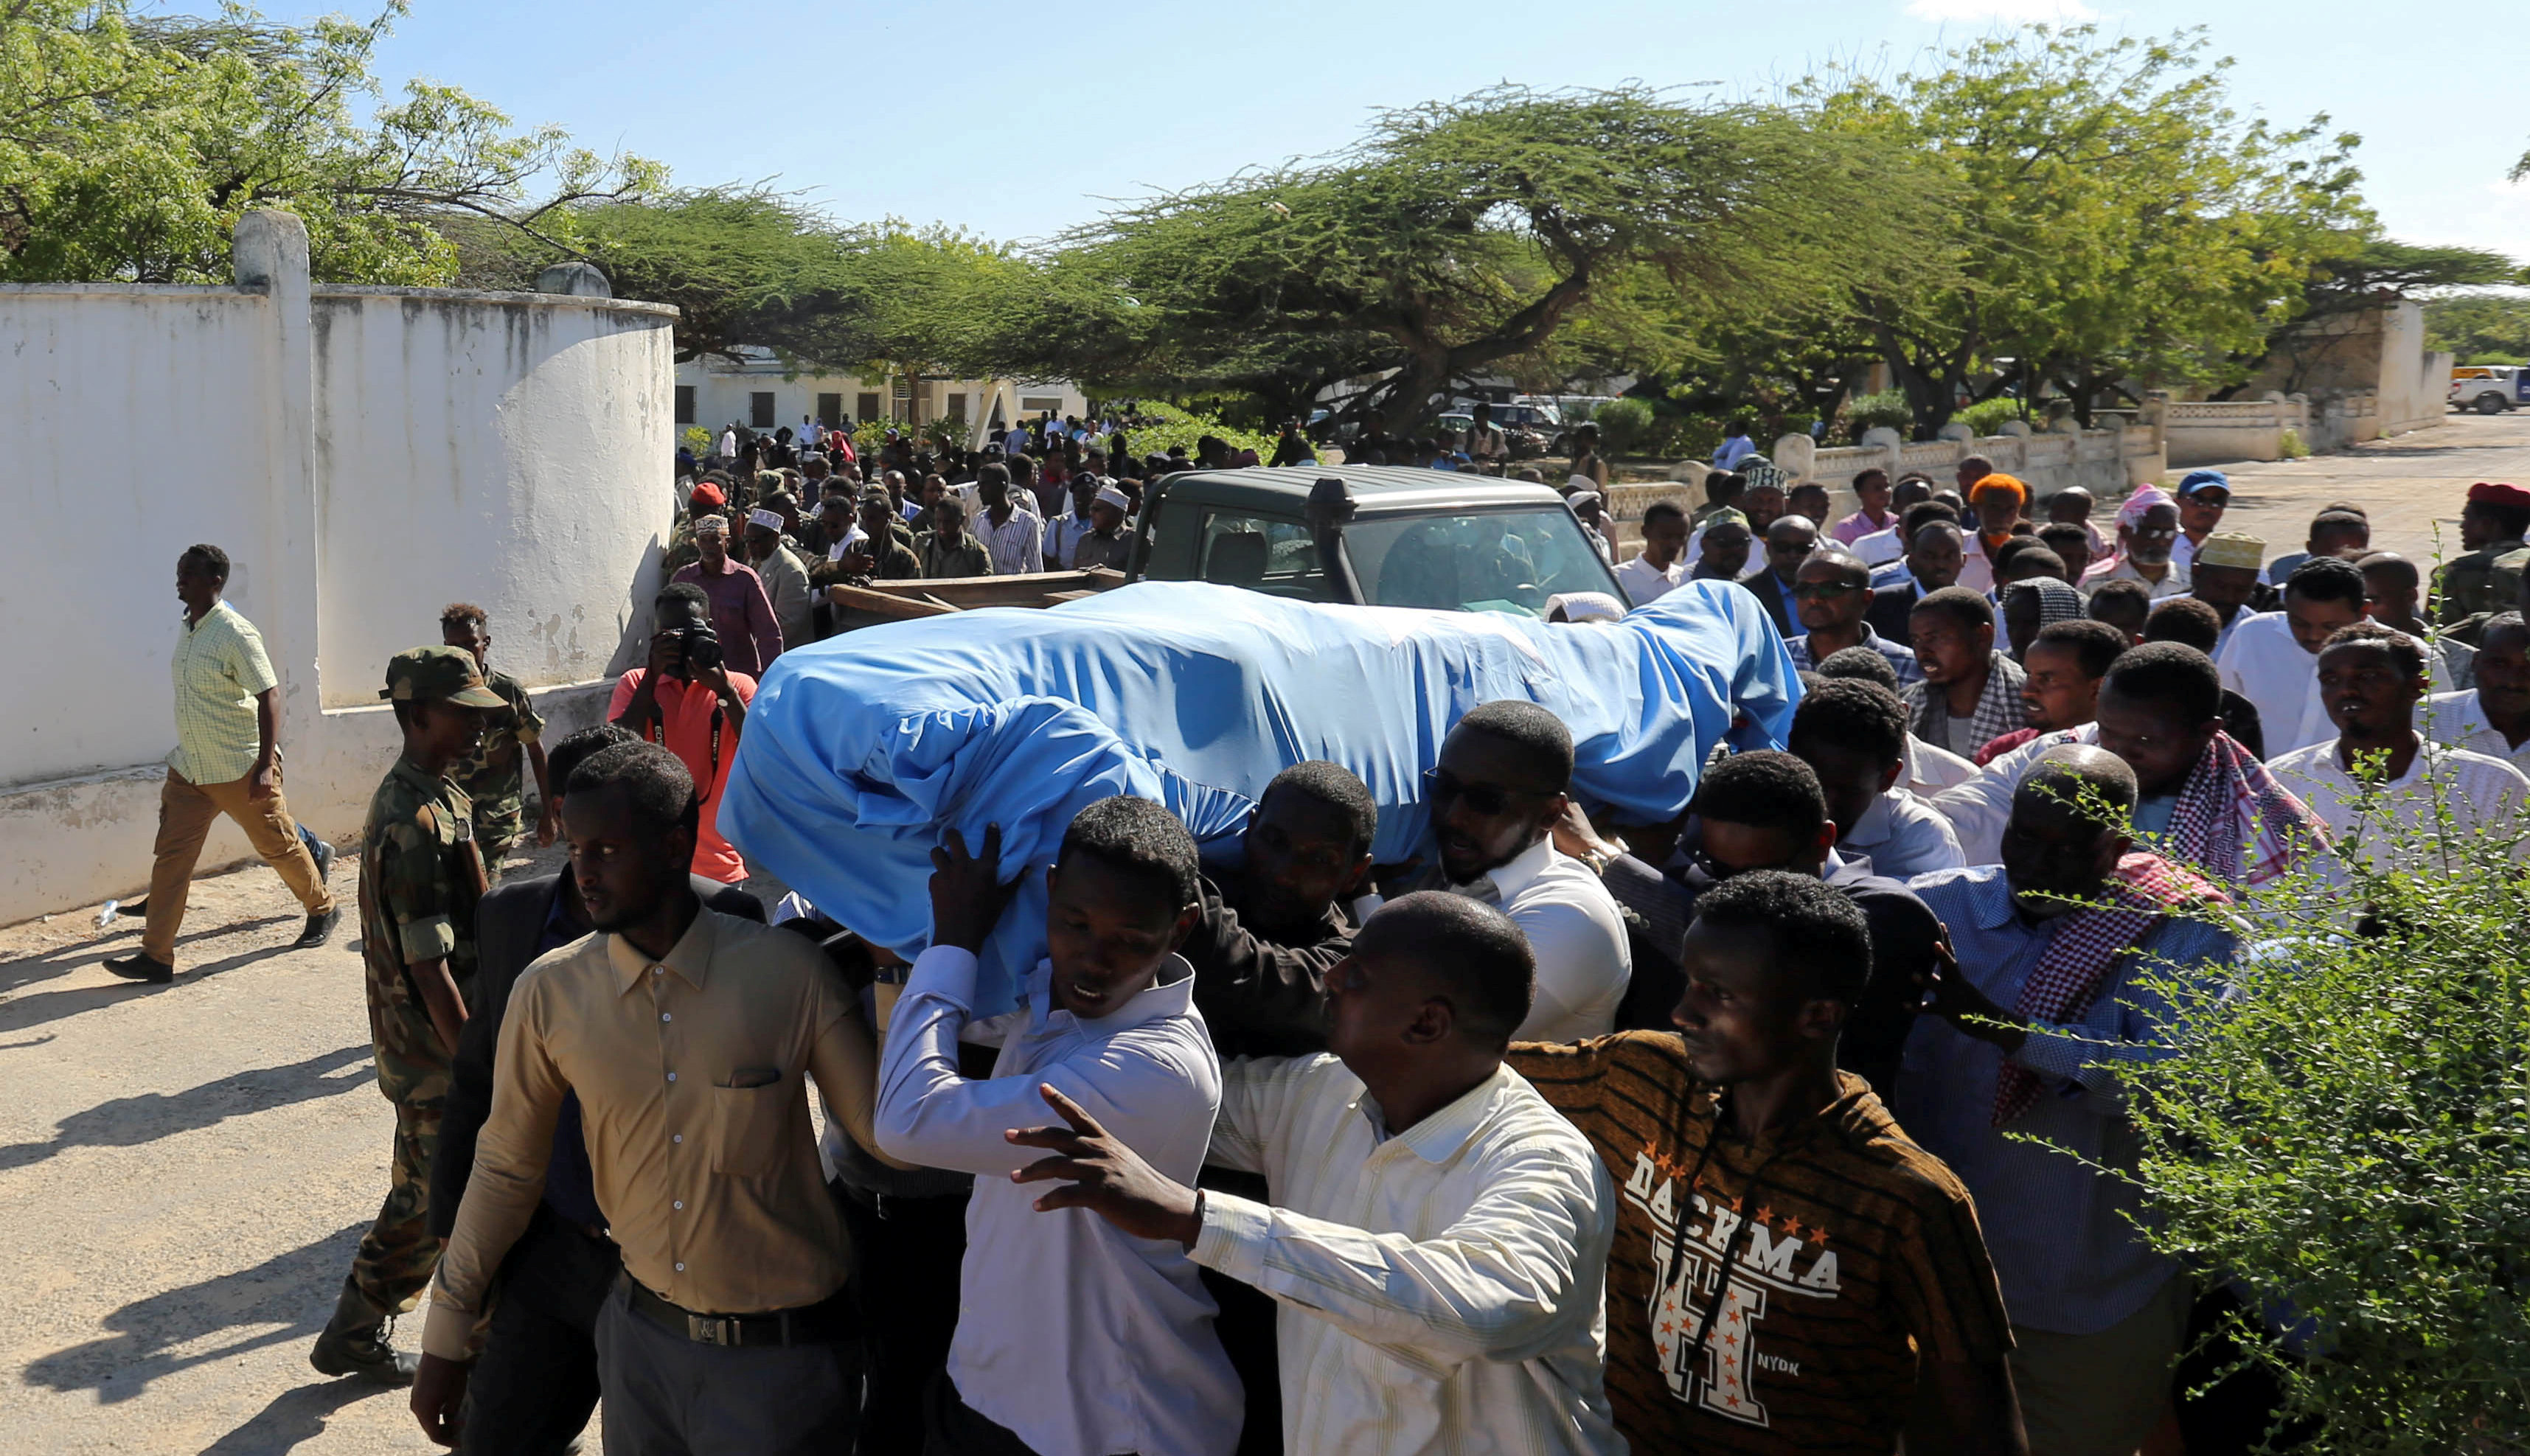 Relatives carry the dead body of Somalia's public works minister Abbas Abdullahi Sheikh Siraji who was shot and killed in the capital Mogadishu